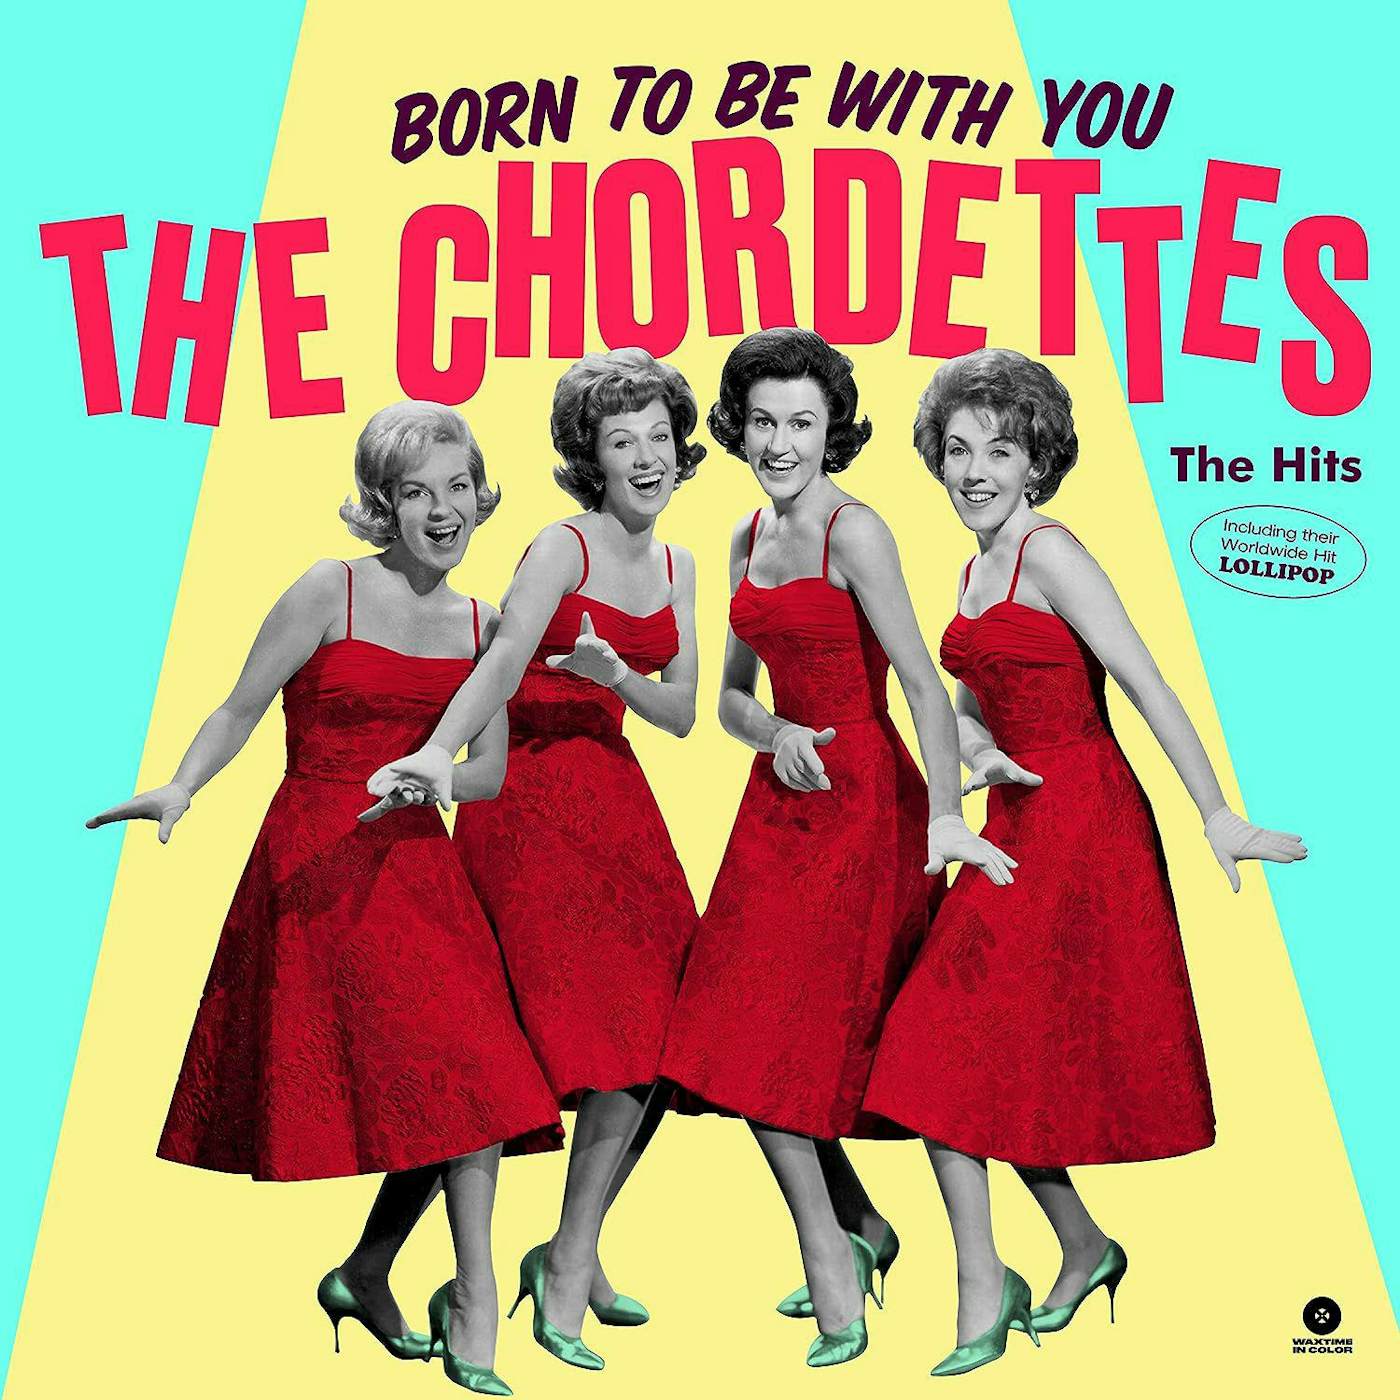 The Chordettes LP Vinyl Record  Born To Be With You  The Hits